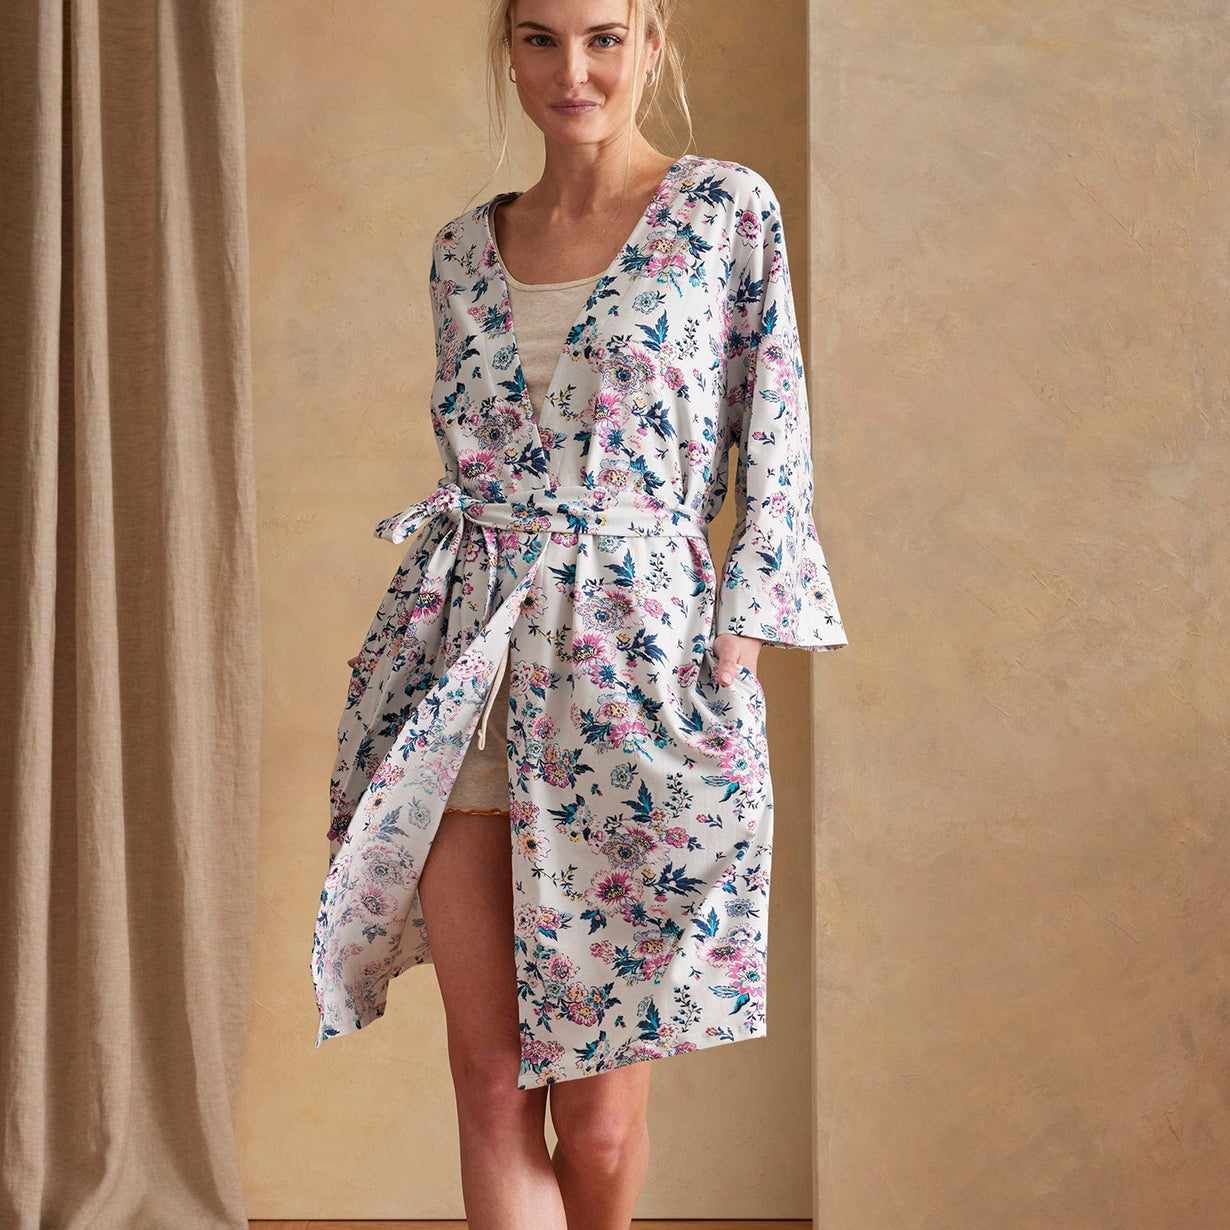 model wearing soft knit robe with floral pattern